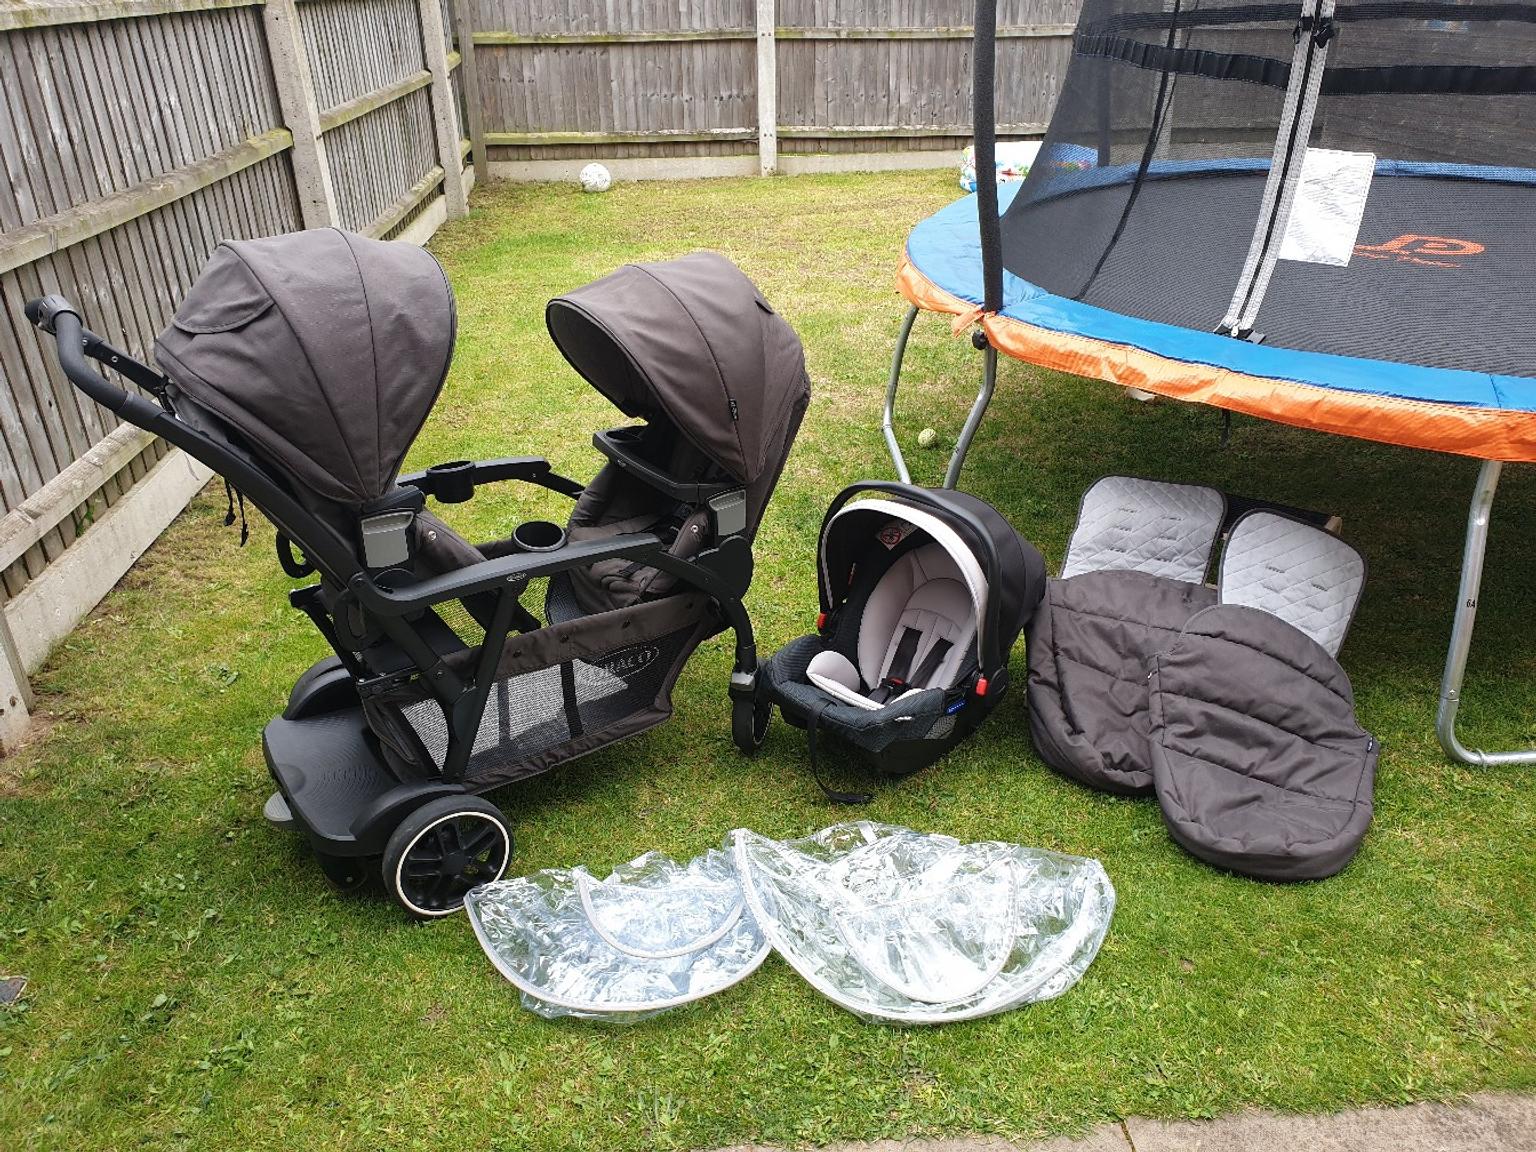 graco modes duo tandem